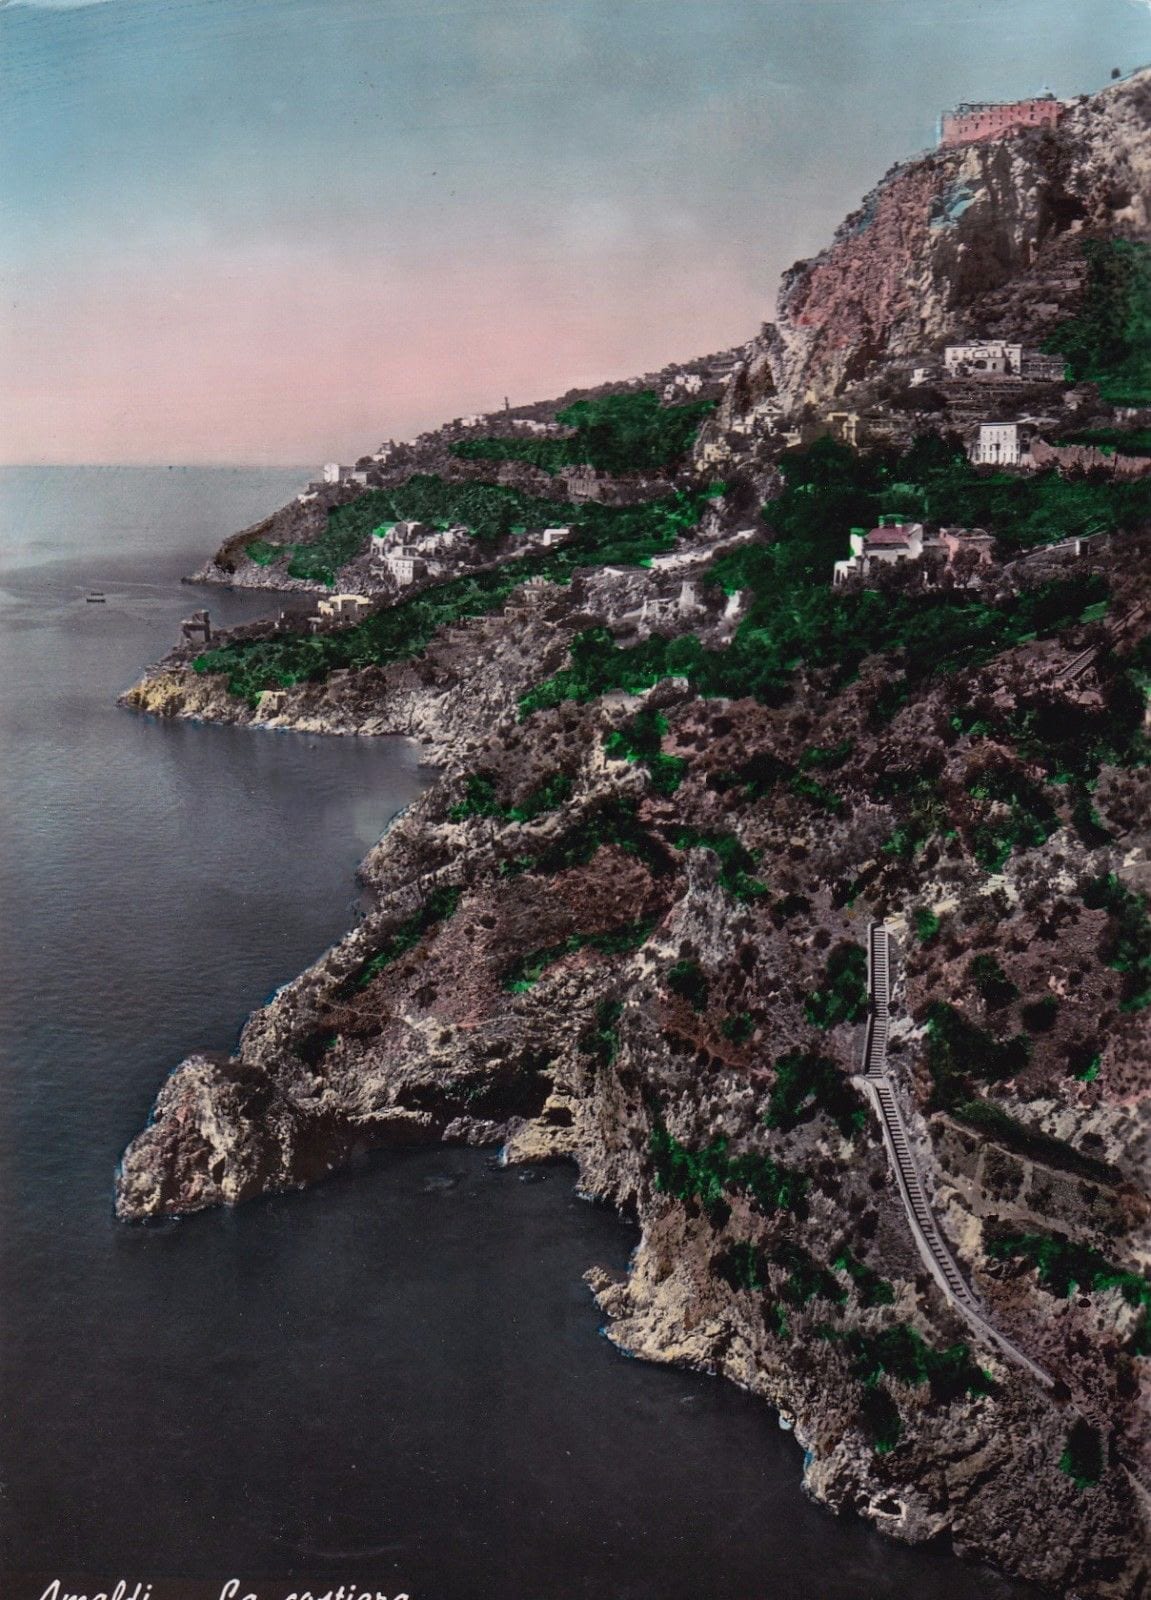 Amalfi. A view of the coast in 1953.